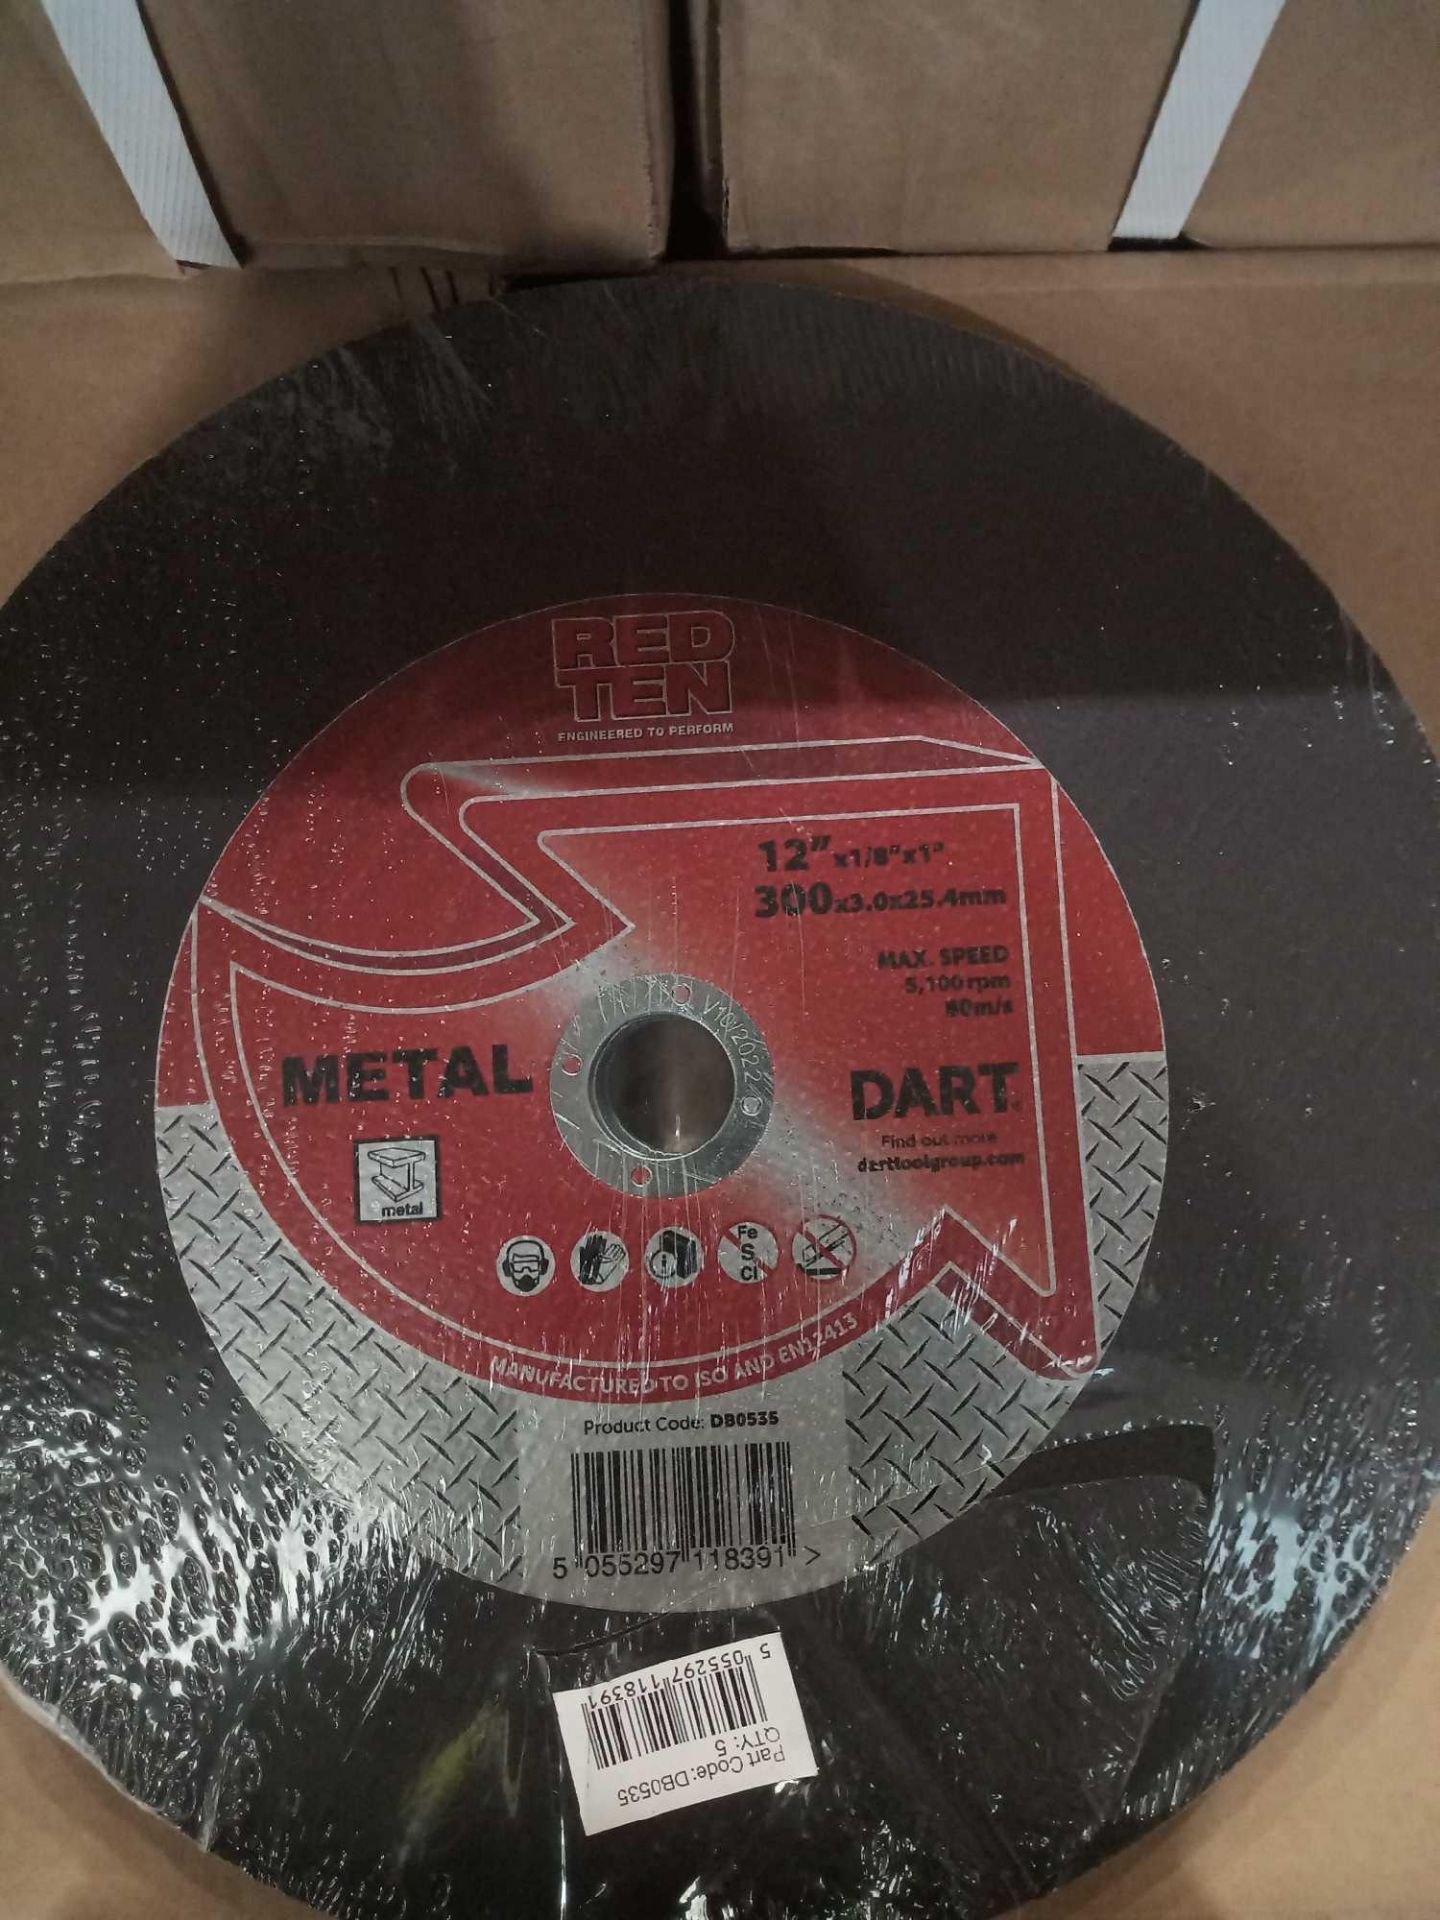 RRP £150 Box To Contain 25 Brand New Dart Metal Db0535 Red Ten Abrasive Disks - Image 3 of 3